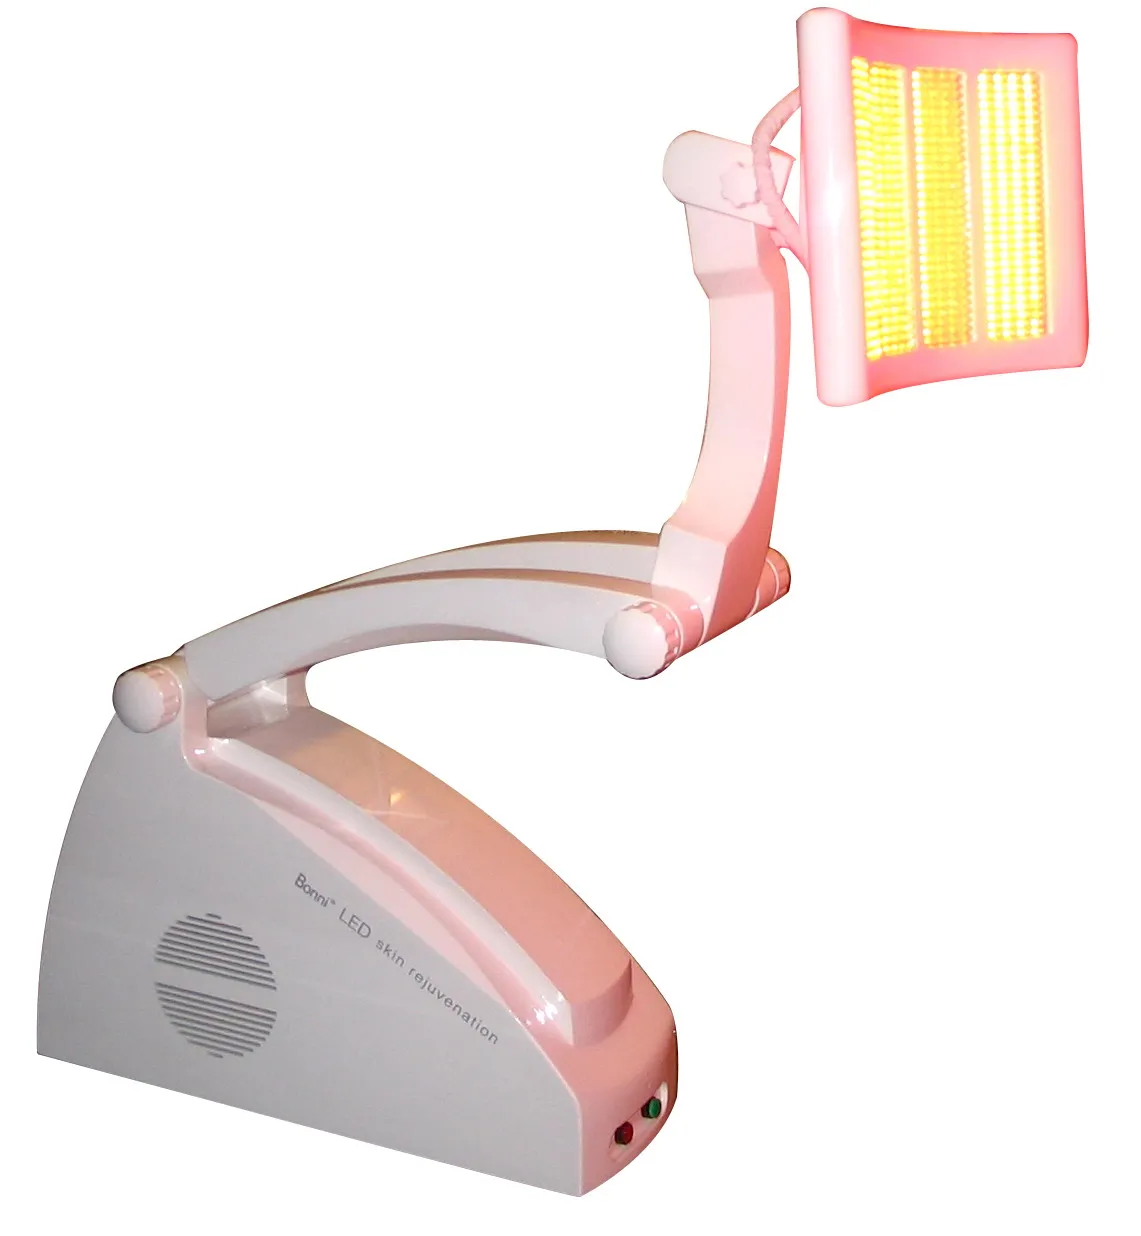 Red Blue infrared LED light therapy machine Photon color led light therapy machine for skin care